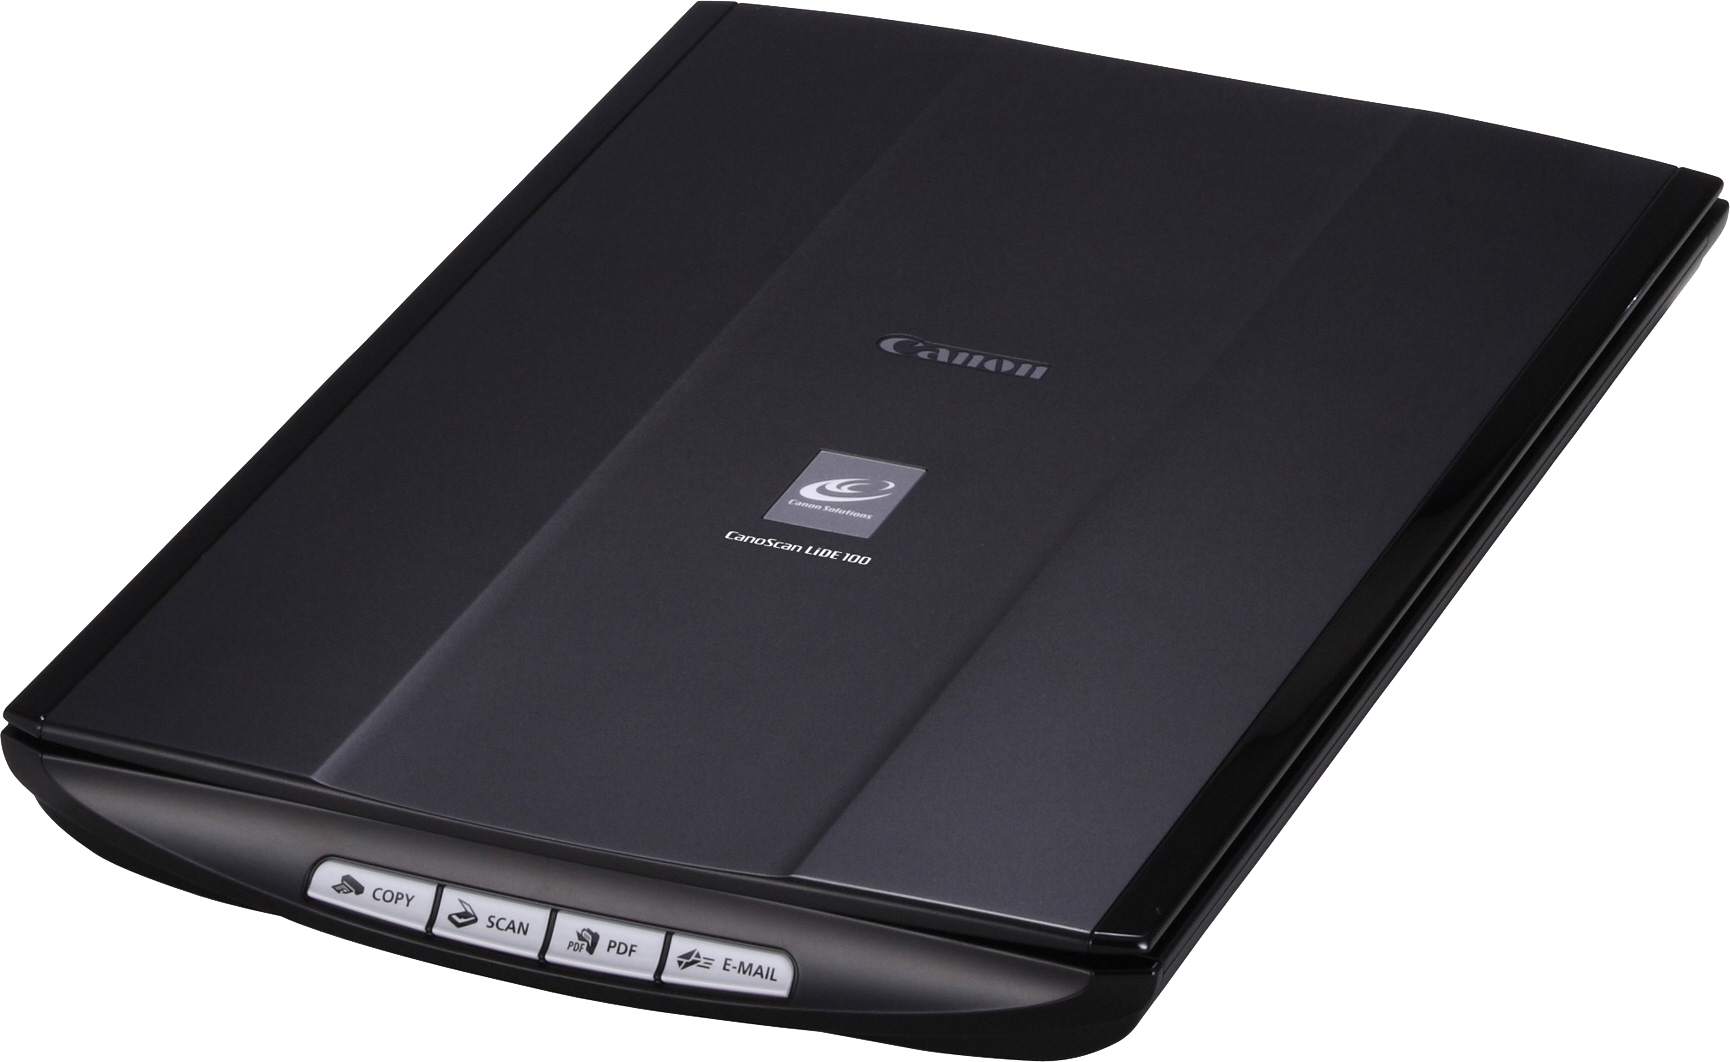 canon lide 110 scanner driver install